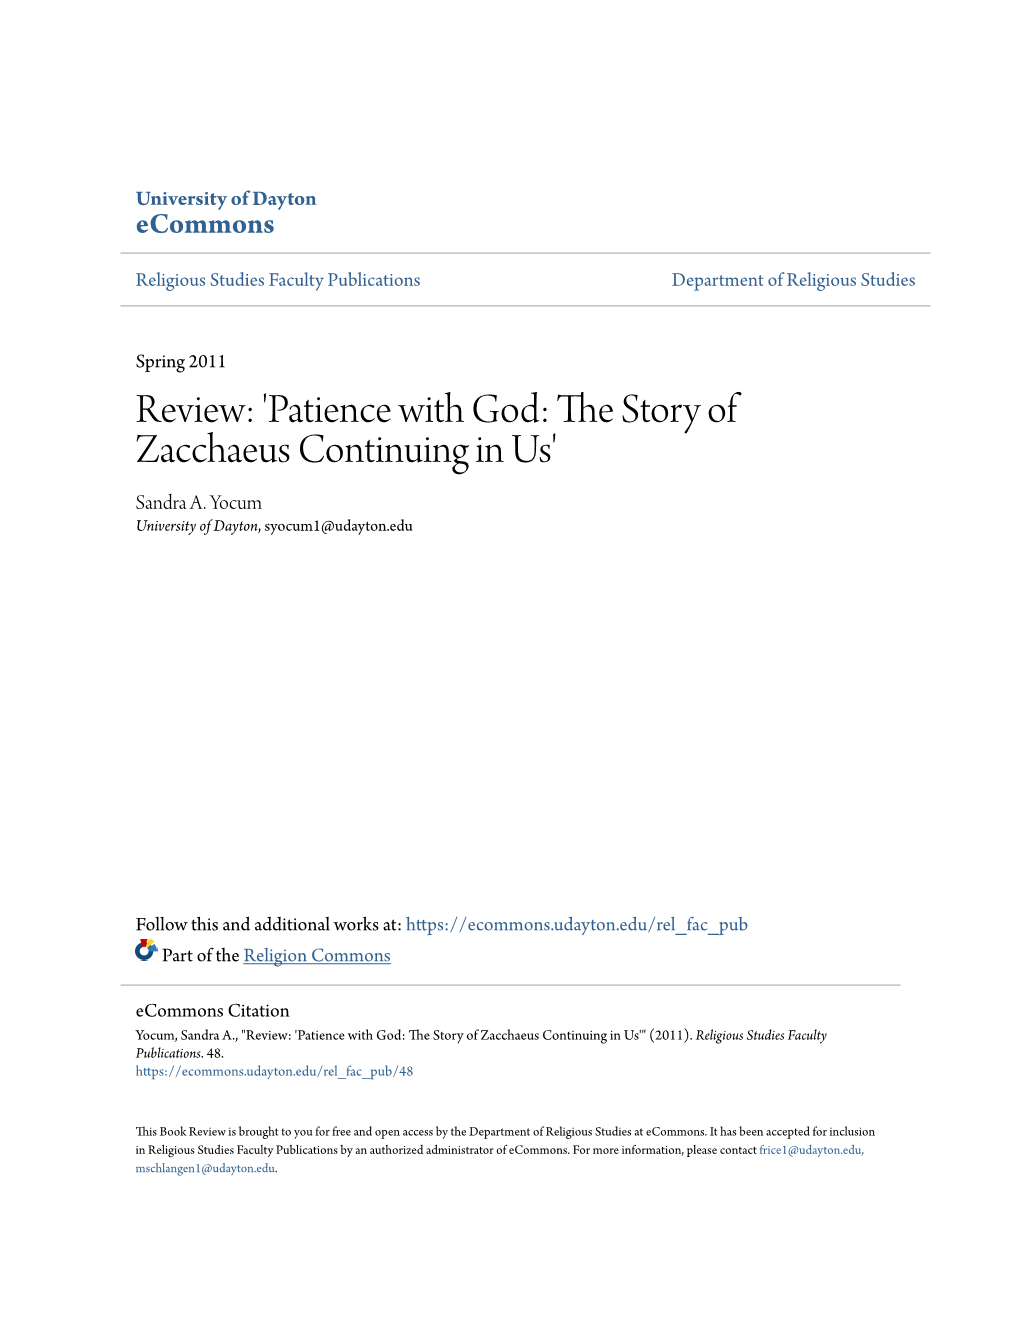 Review: 'Patience with God: the Story of Zacchaeus Continuing In